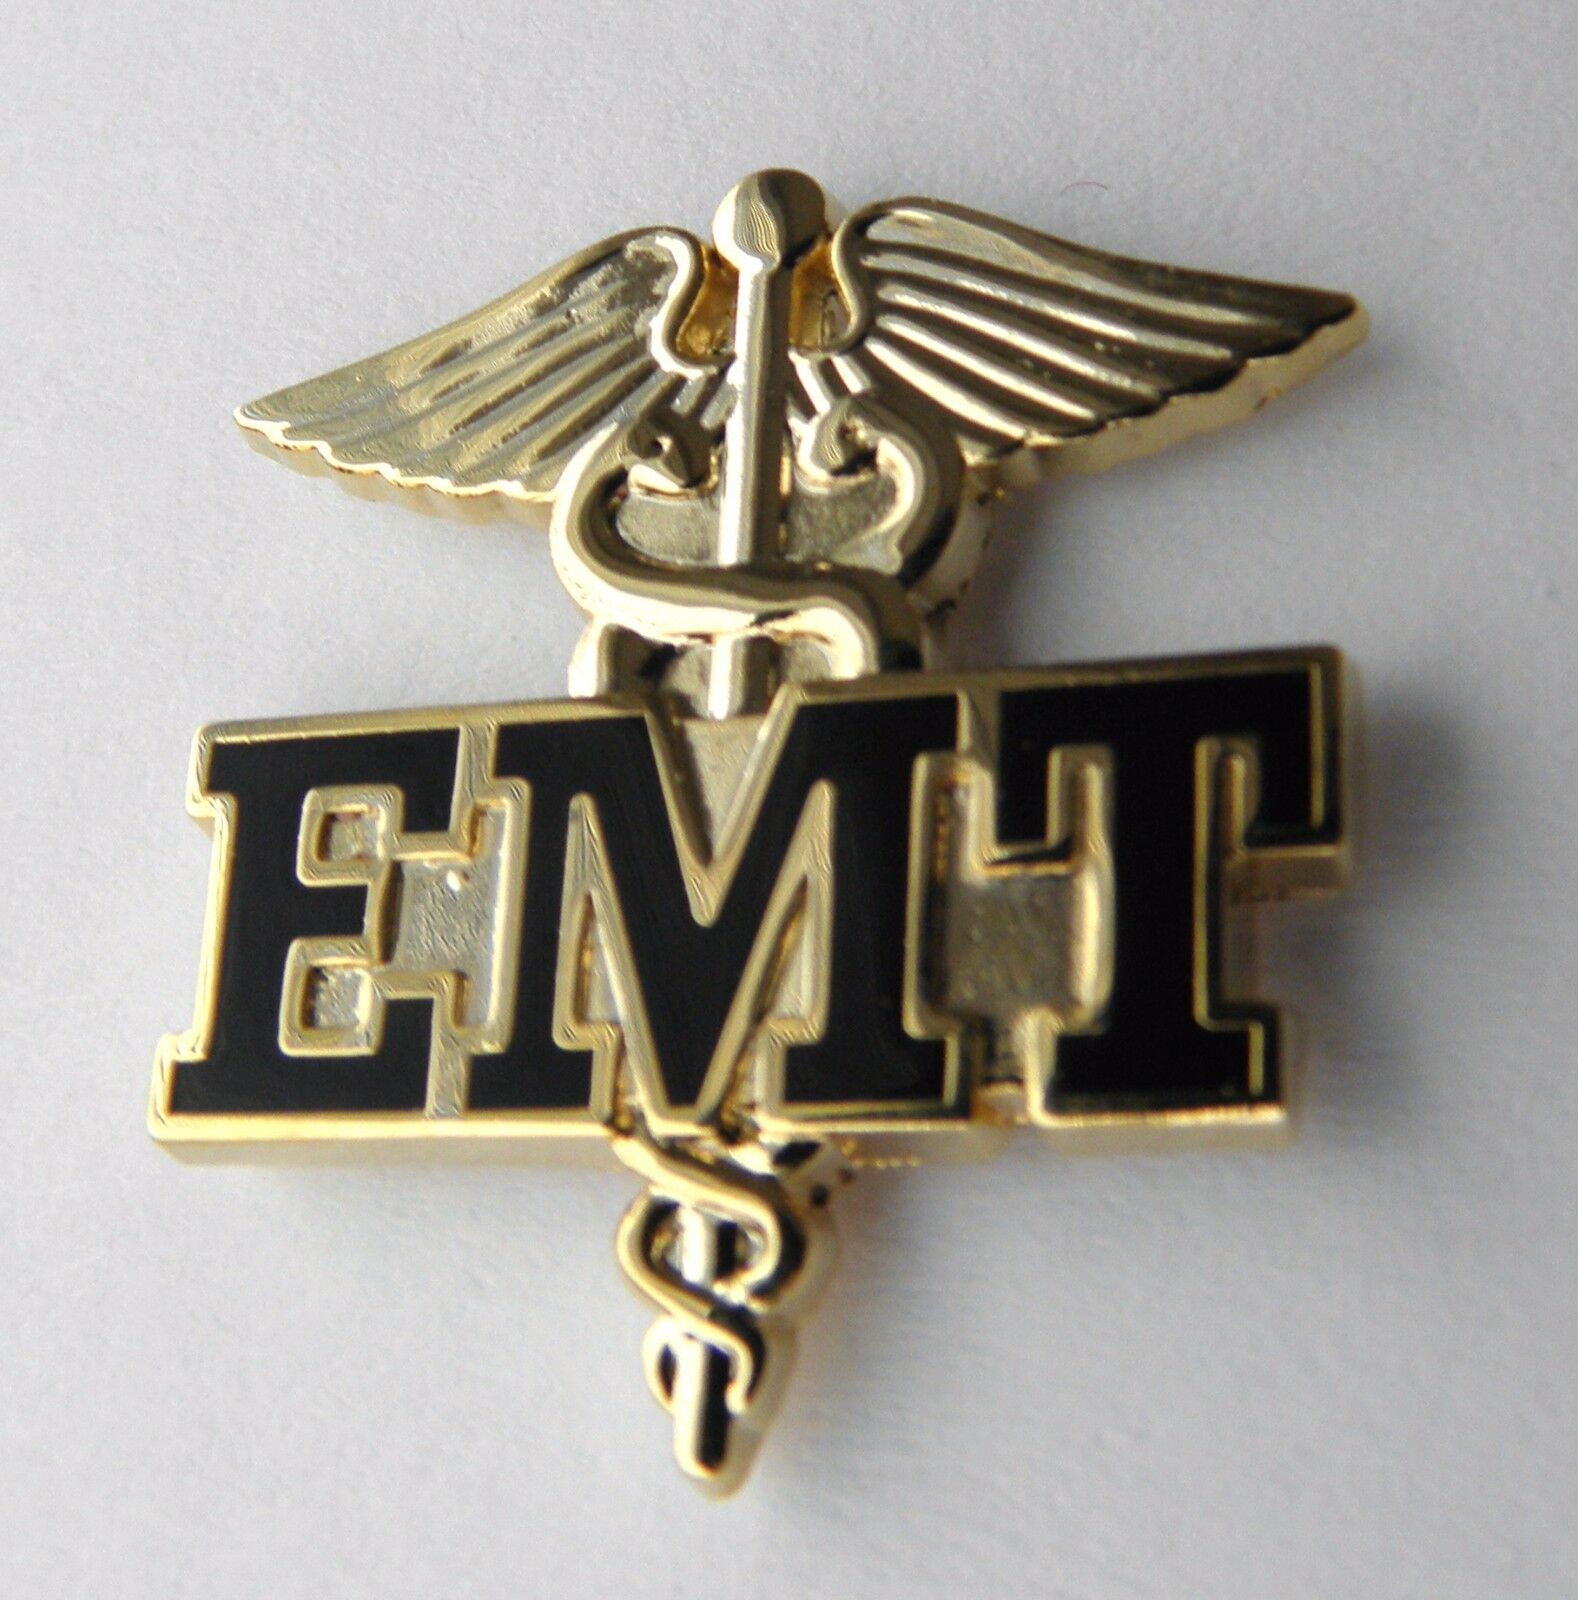 Emergency Medical Technician EMT MEDIC HAT PIN US ARMY NAVY AIR FORCE MARINES 